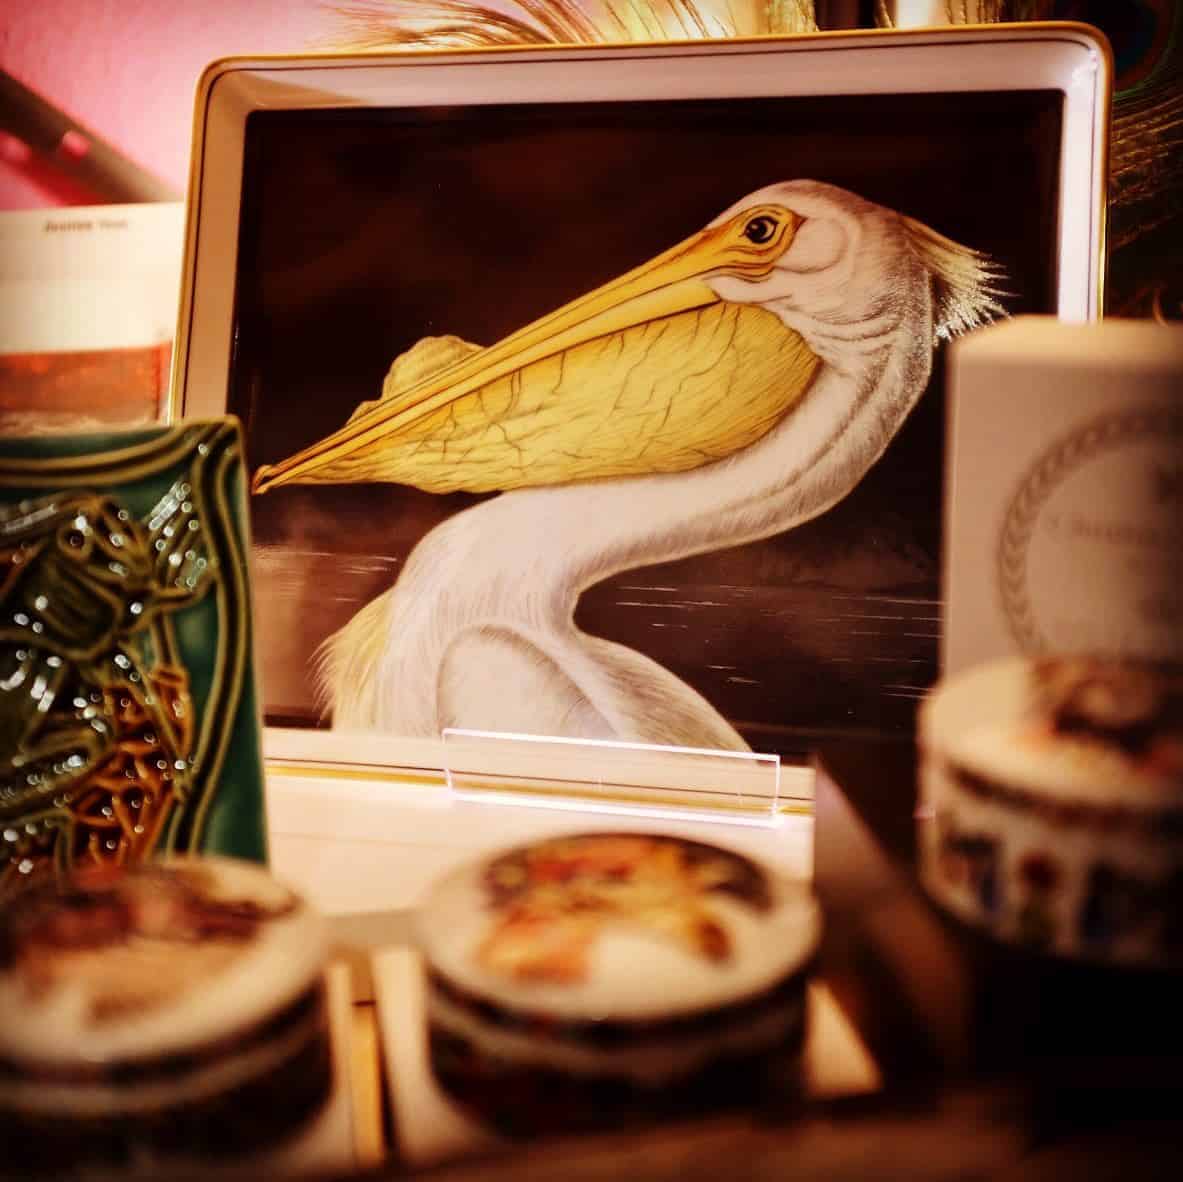 Tray White Pelican Voo porcelain with the stamp and quality of Vista Alegre.